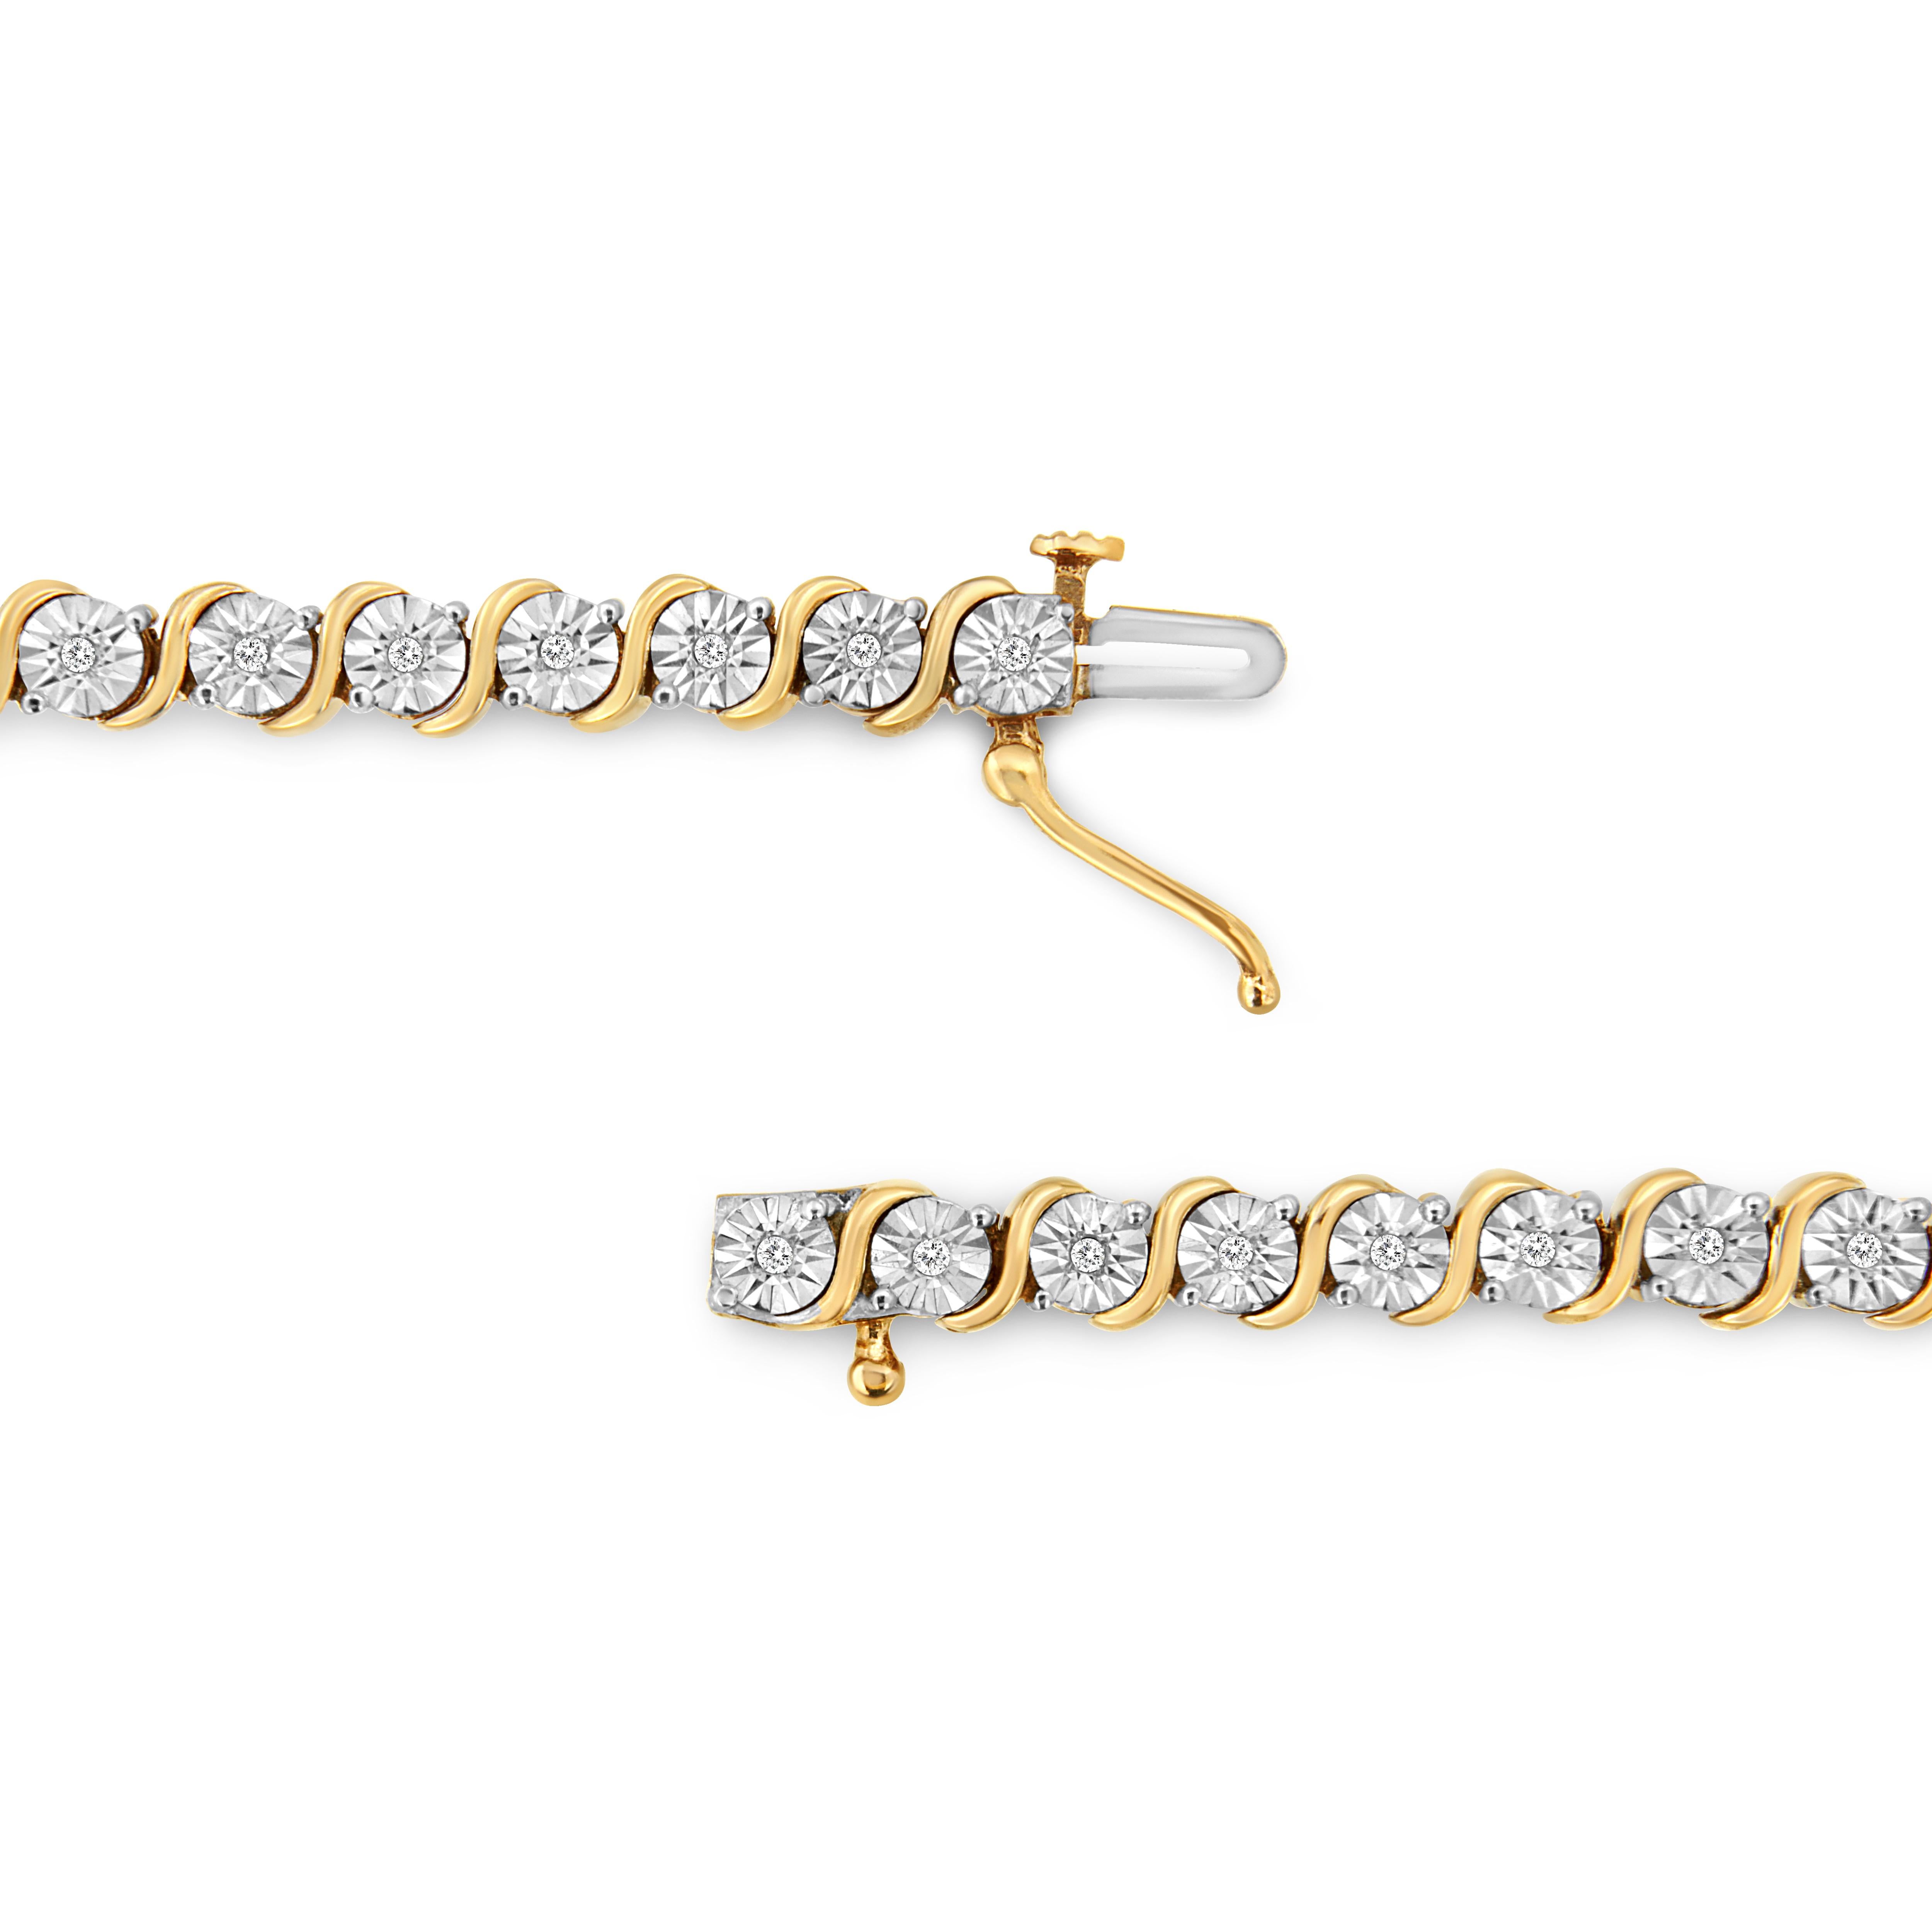 diamond link bracelet 1/4 ct. t.w. in sterling silver or 14k yellow gold over sterling silver